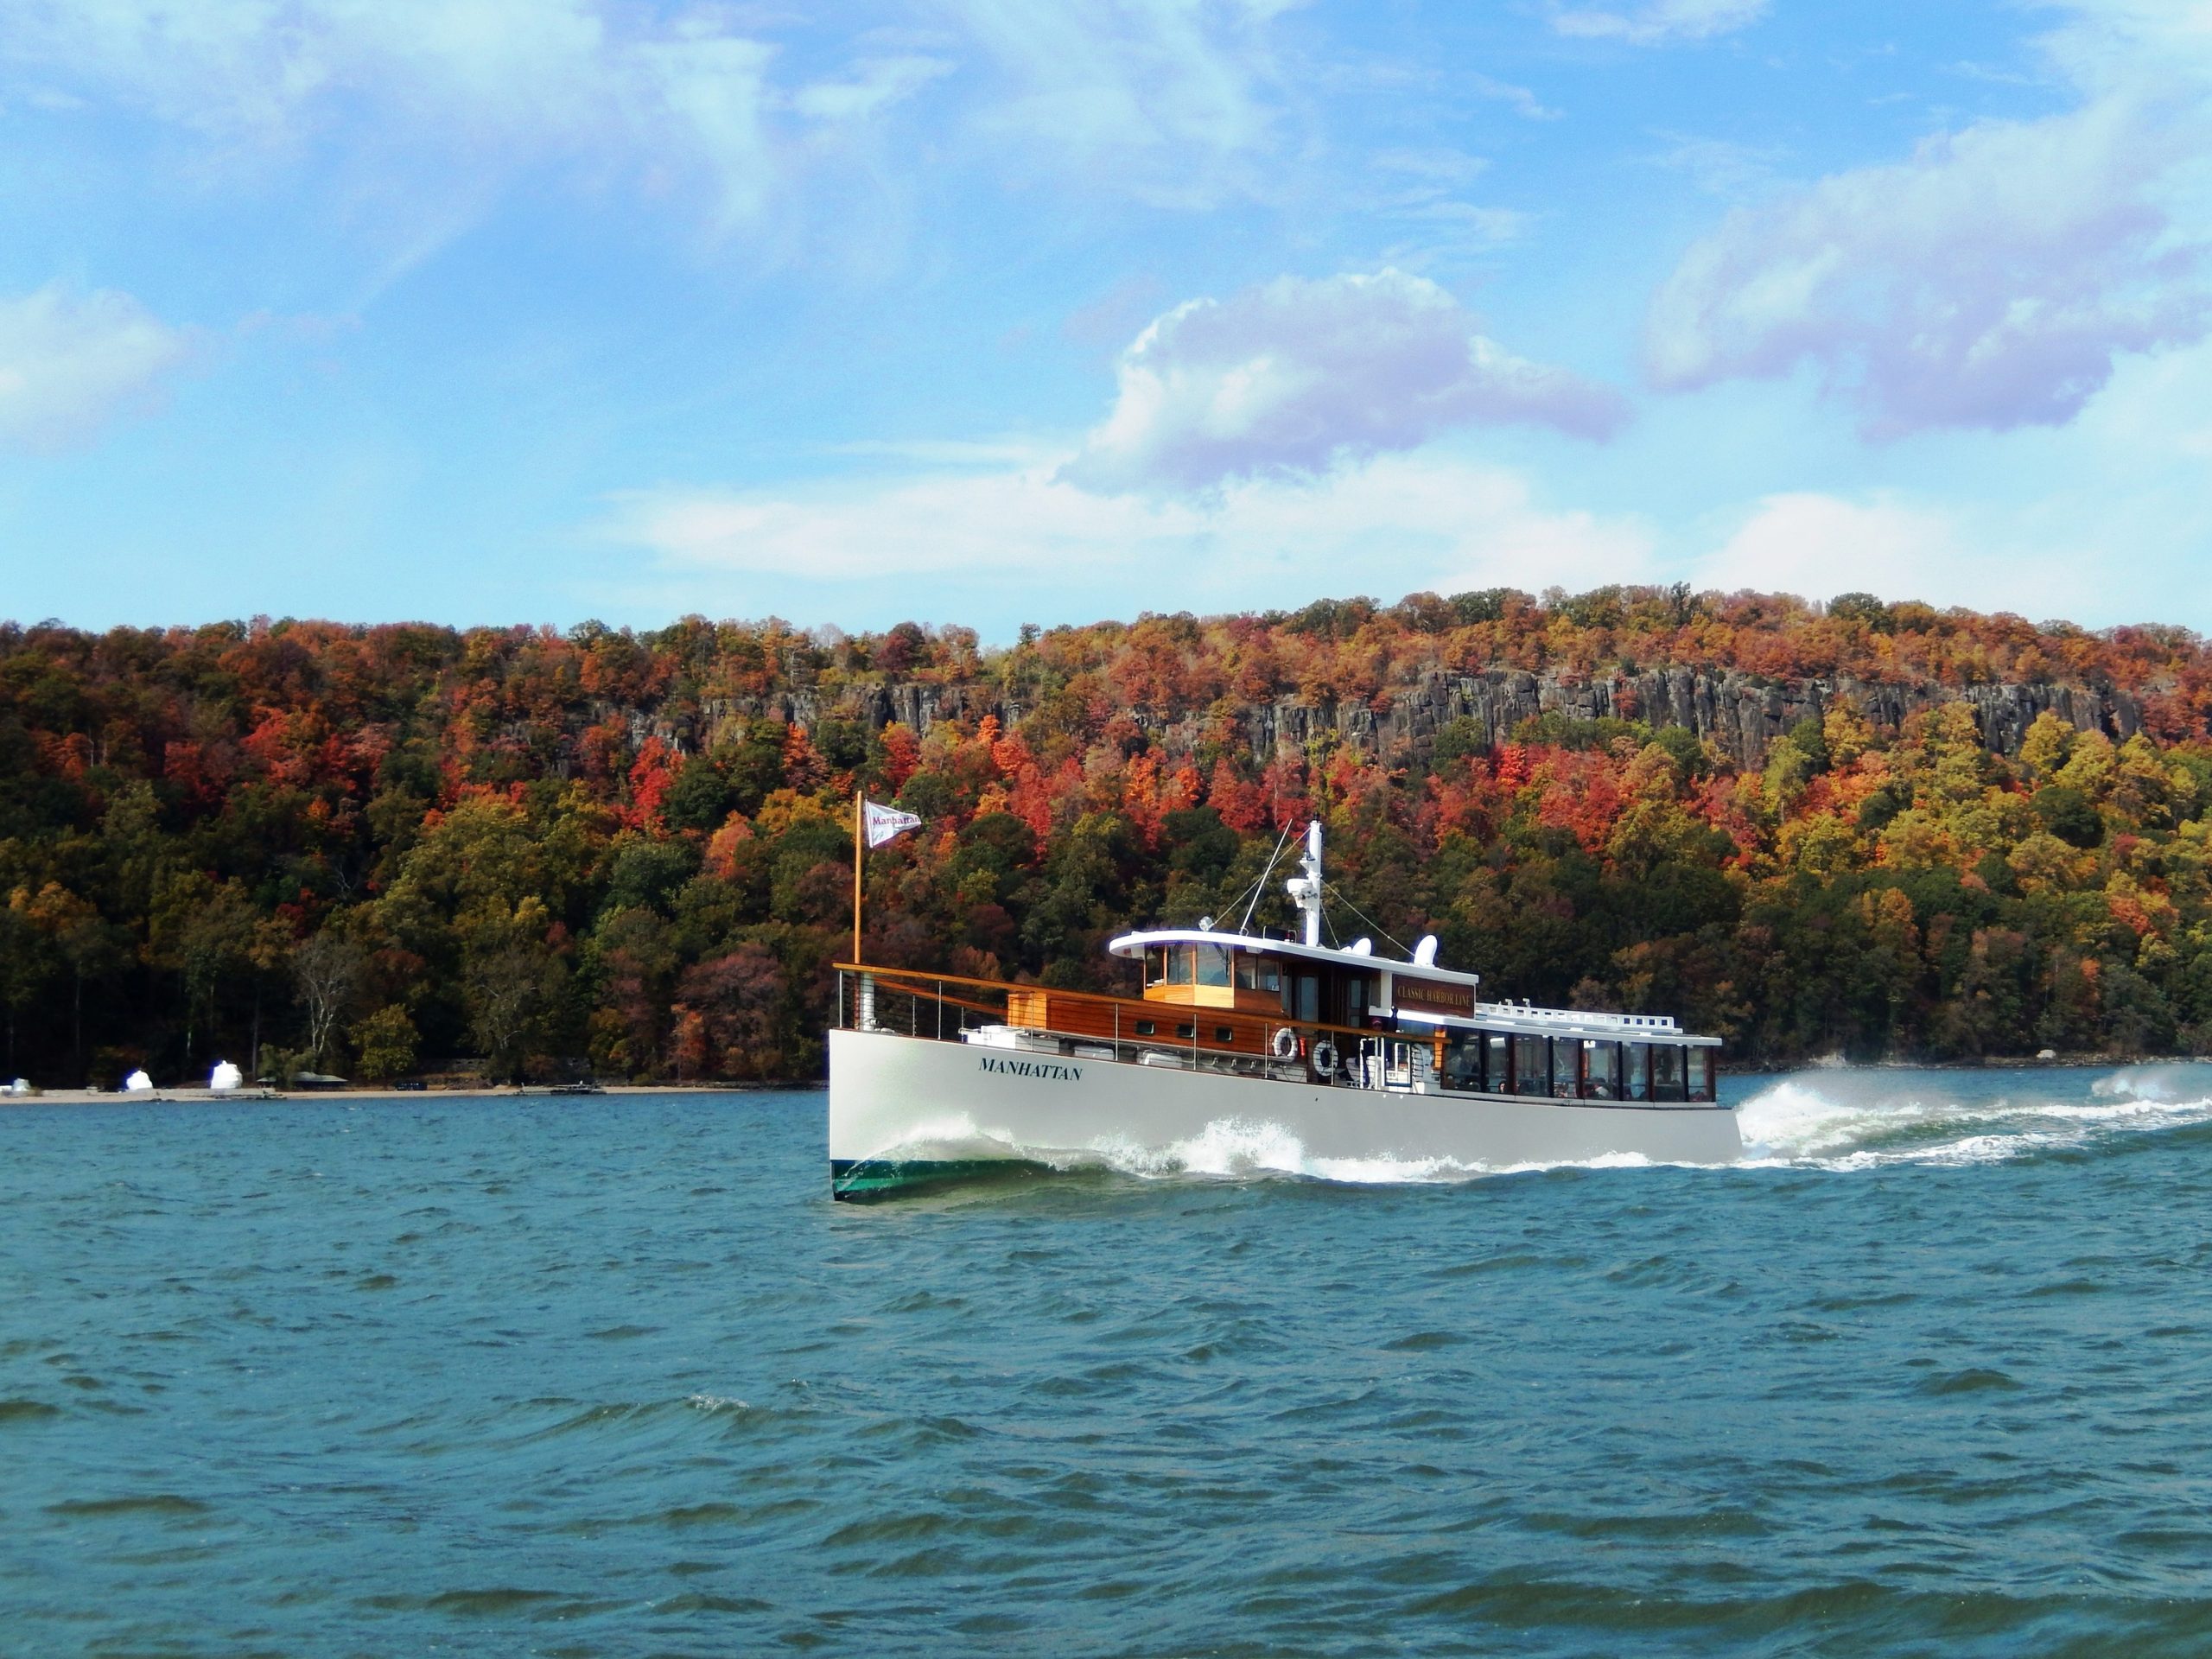 Motor yacht Manhattan II cruises on the Hudson past the vibrant fall foliage on the palisades in the fall.